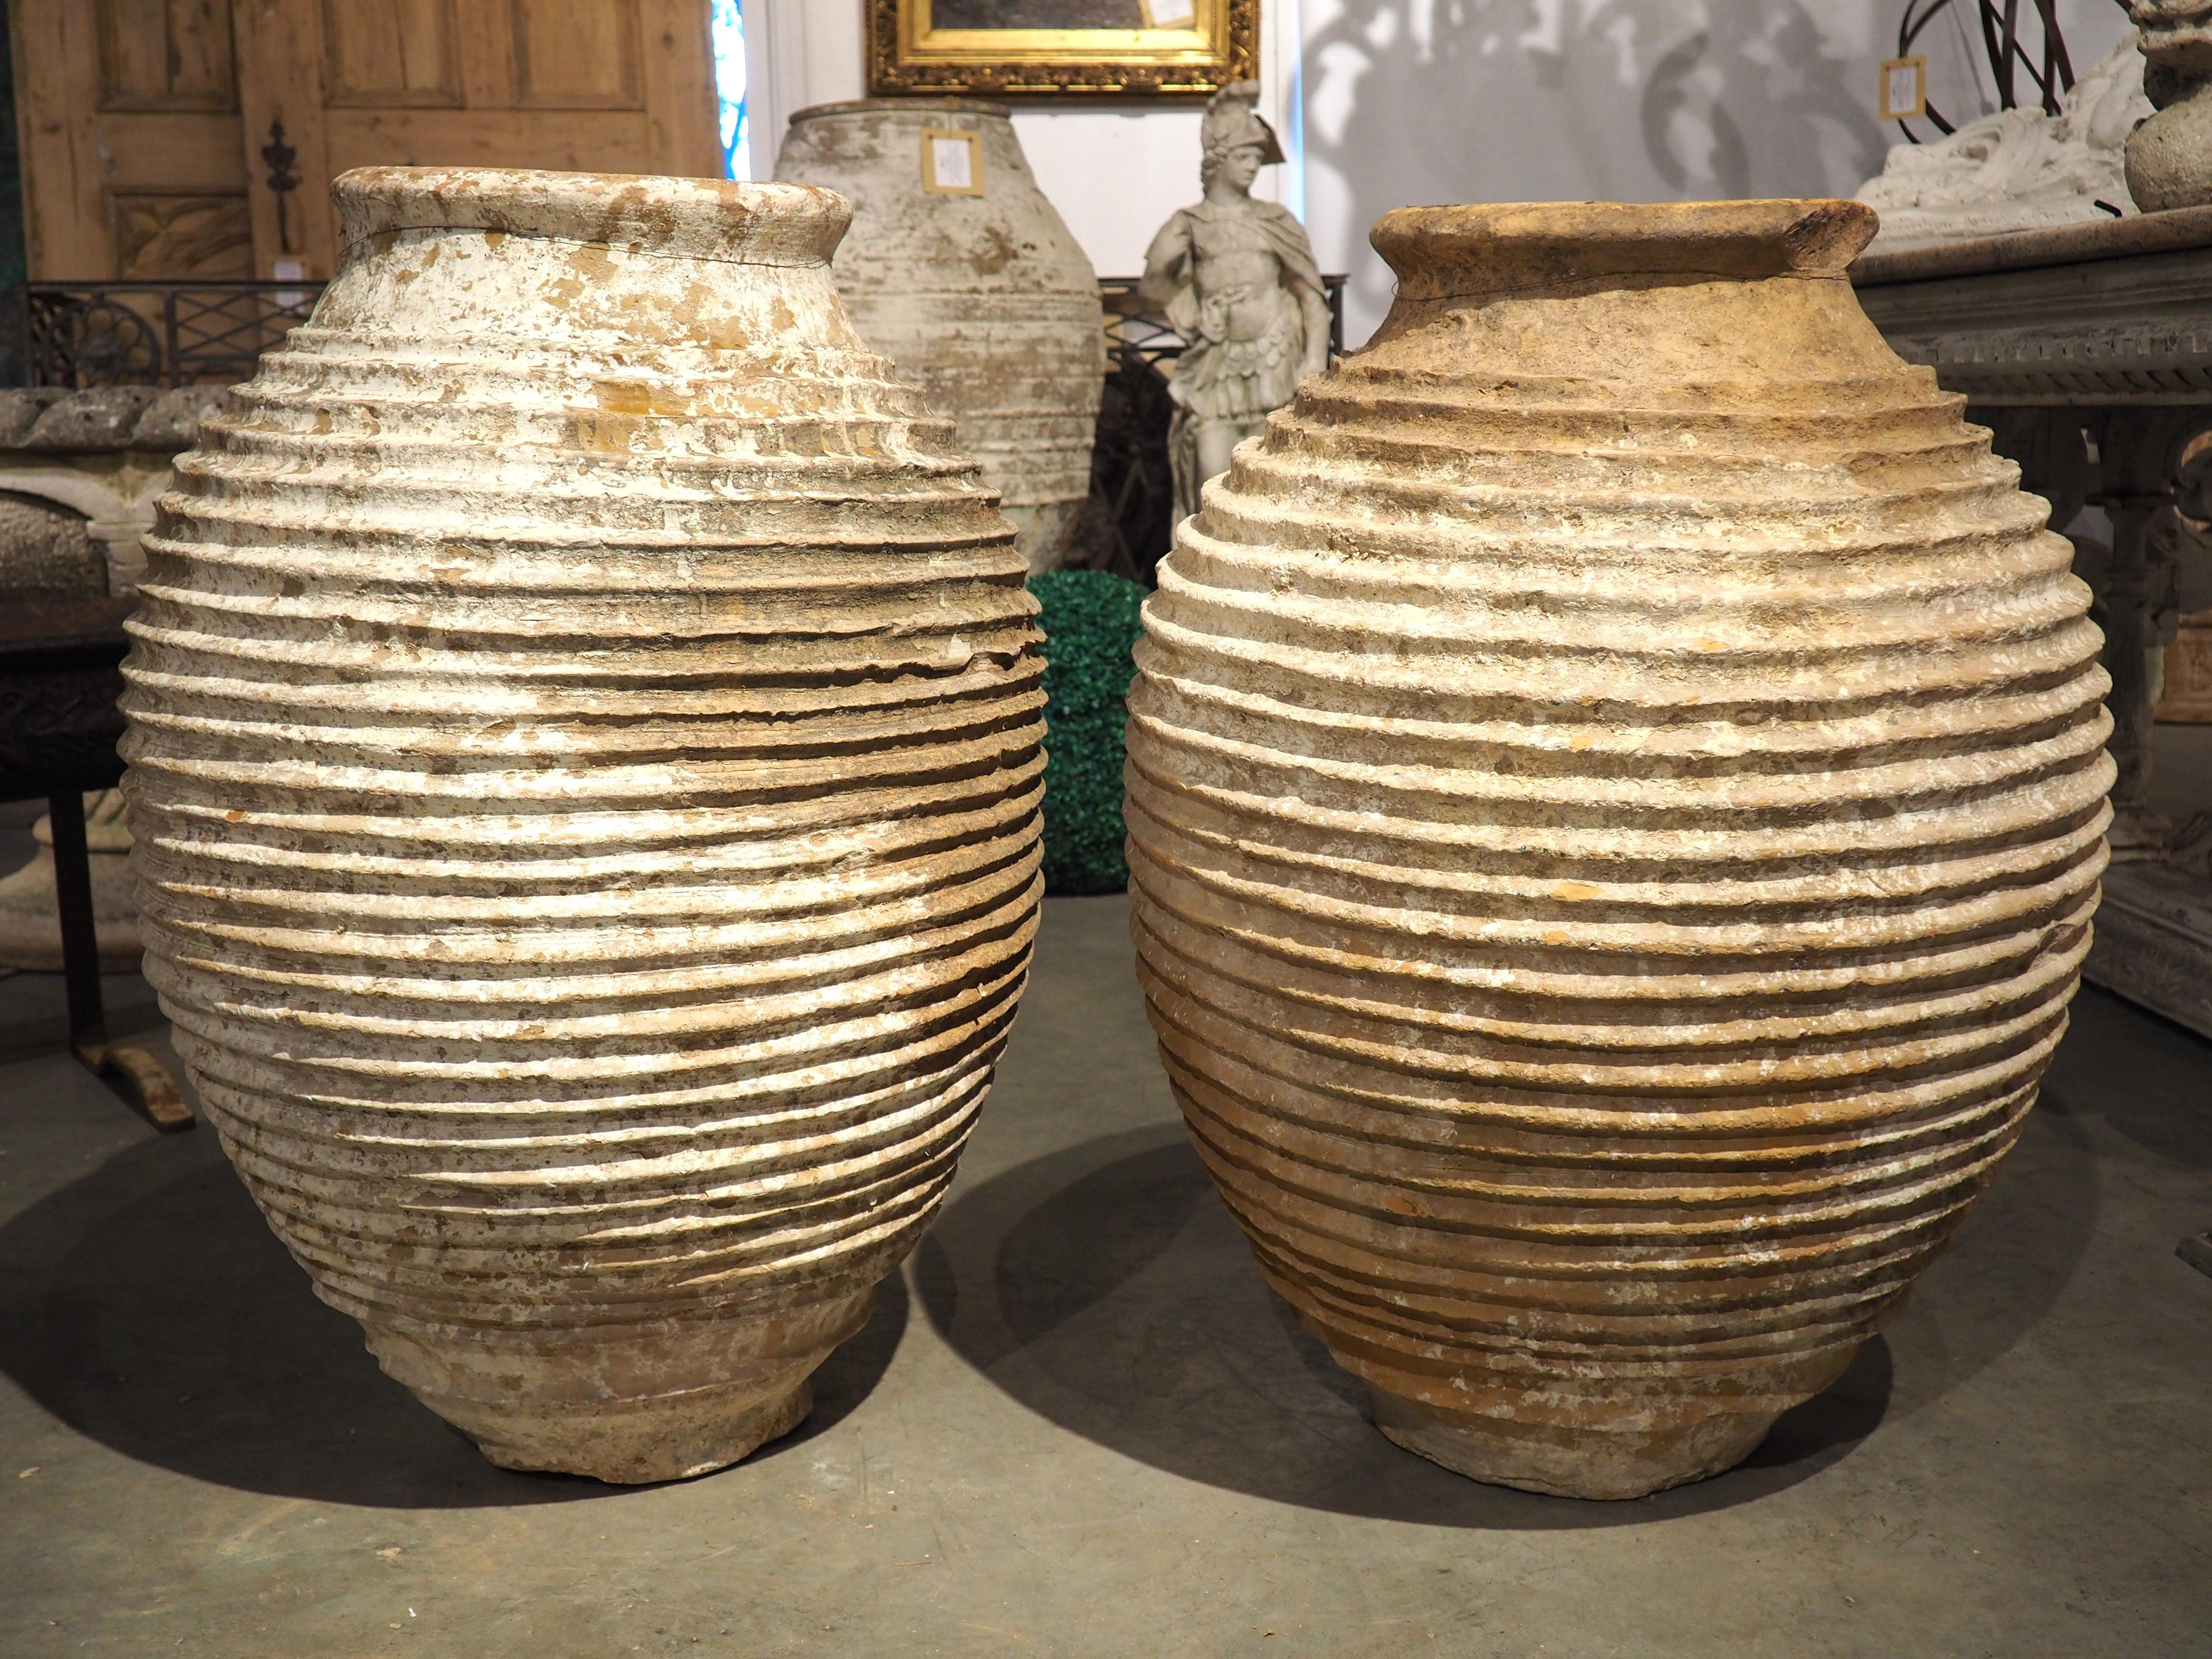 Pair of Large Antique Greek Olive Oil Jars from the Peloponnese Region, 19th C. For Sale 10